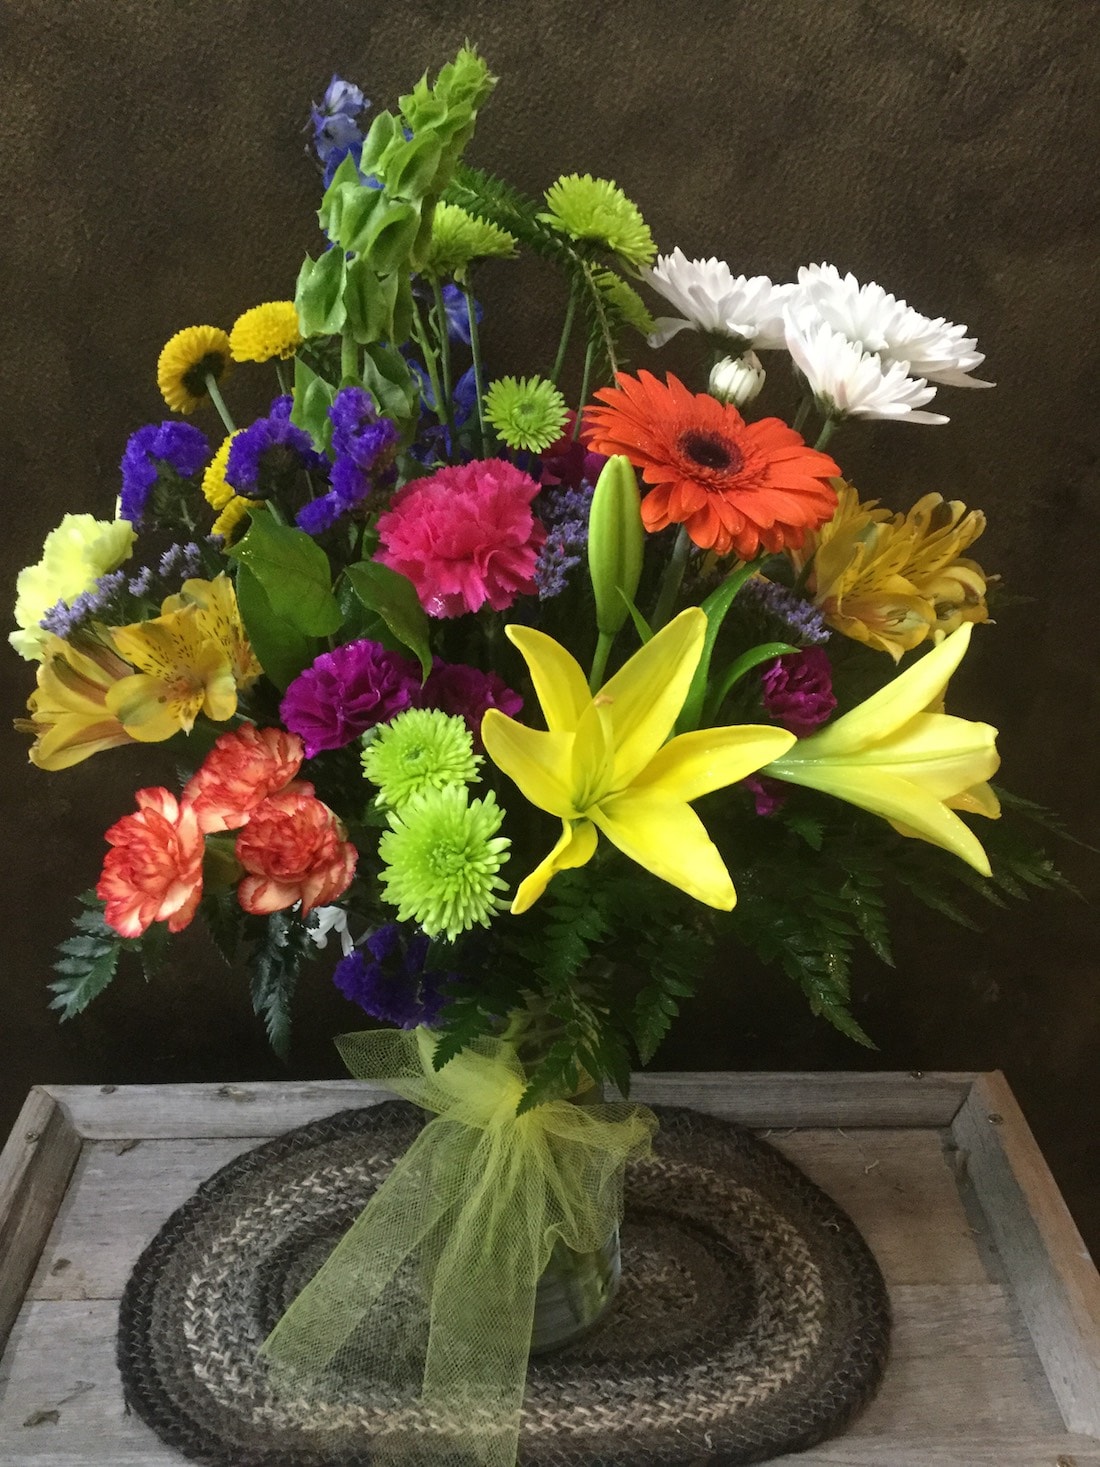 Bright Fresh Spring Flowers in a Vase